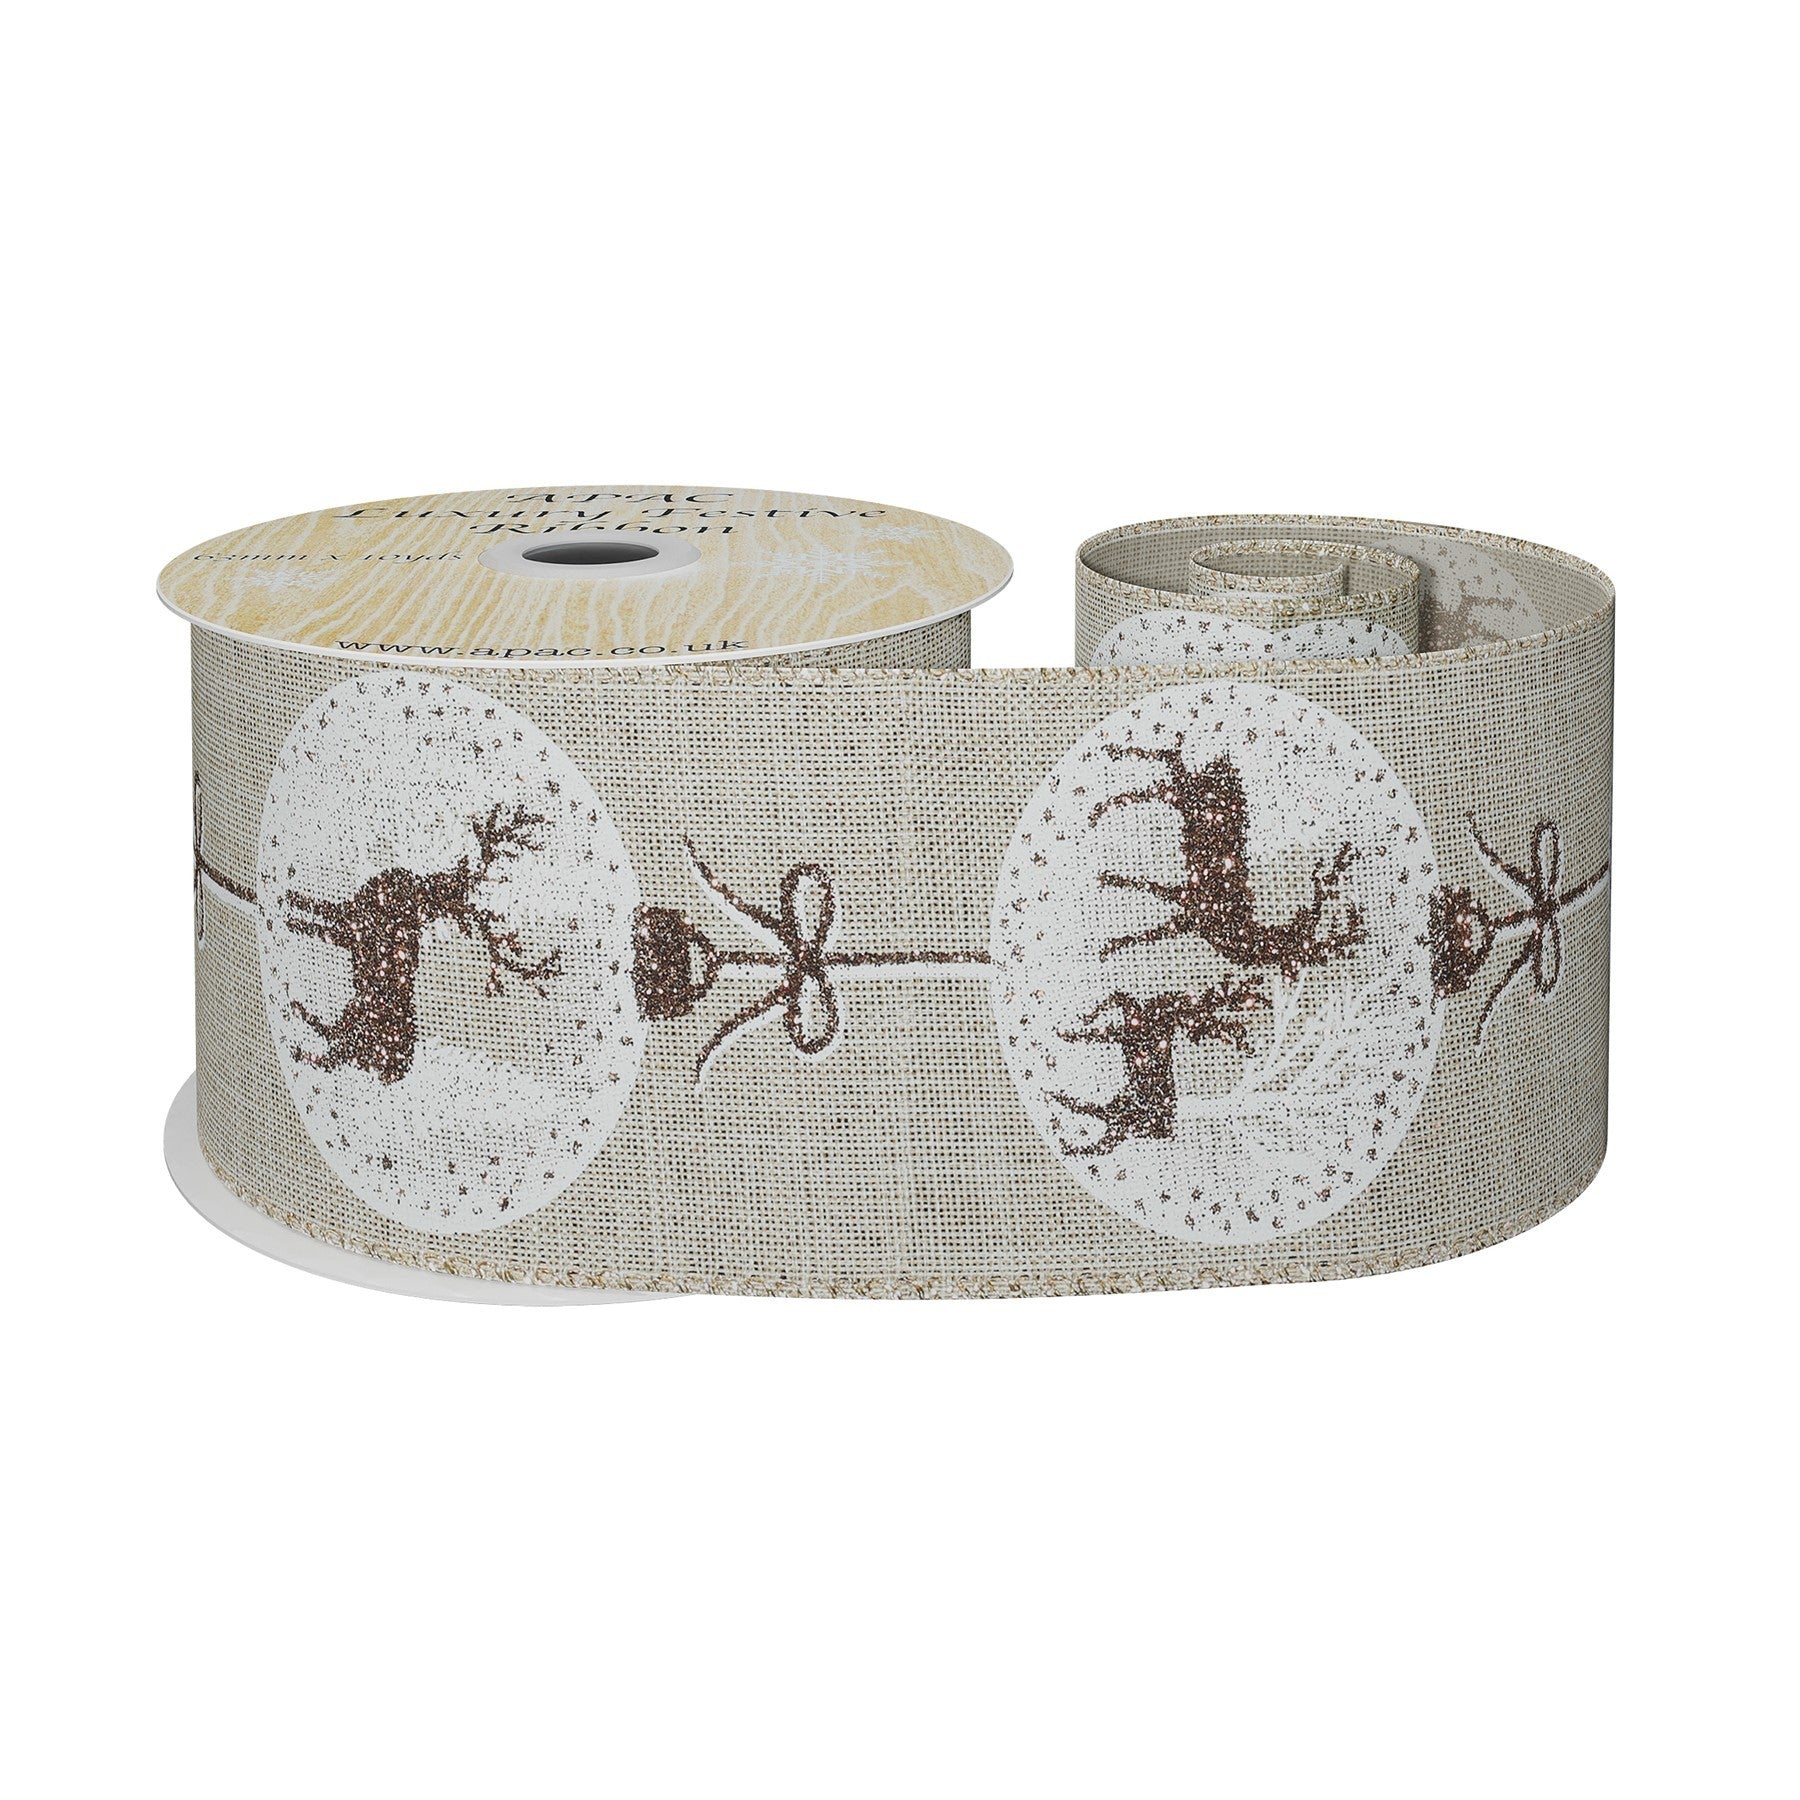 View Natural Ribbon with Reindeer Bauble Print Brown White 63mm x 10yd information